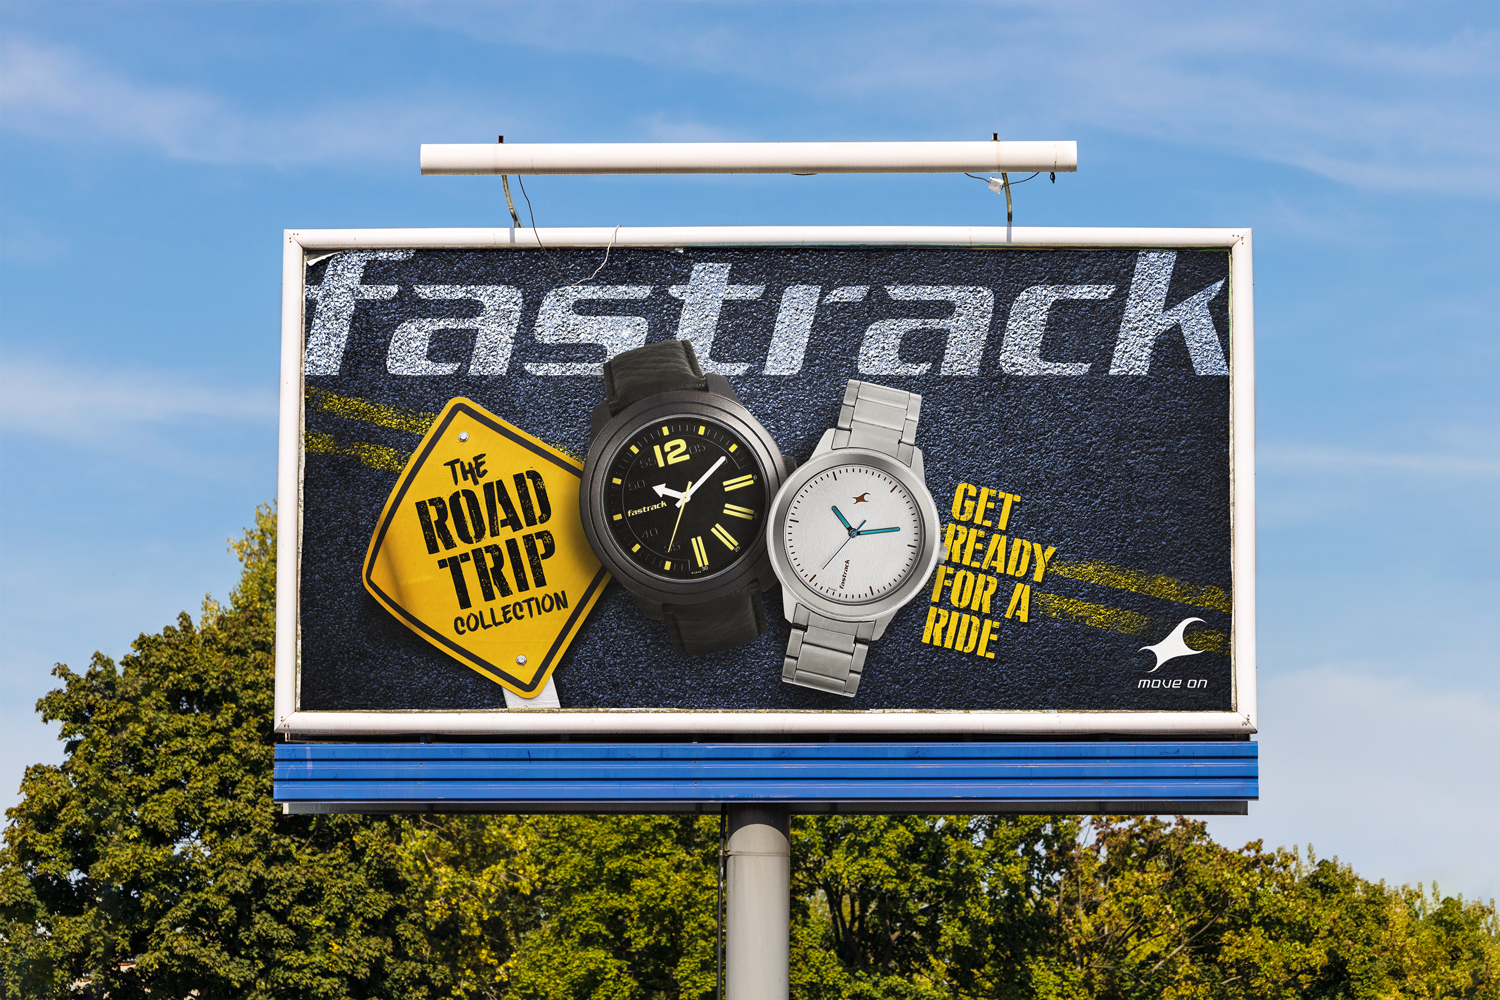 The Road Trip Watch Collection Advertisement Hoarding